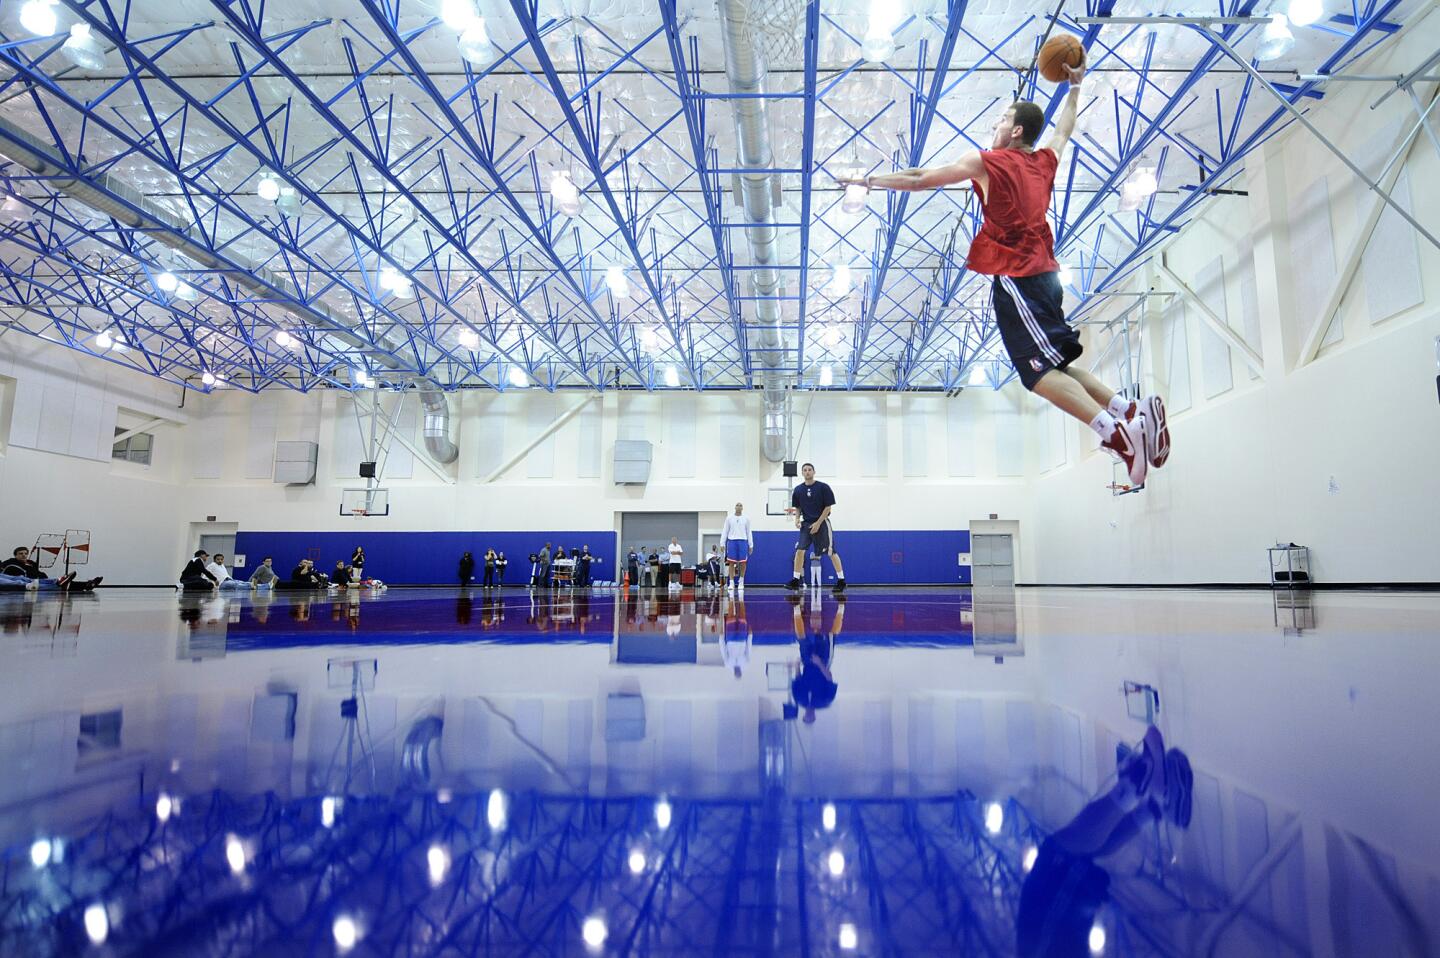 Blake Griffin takes off for a dunk during a workout at the Clippers' training center in Playa Vista before the 2009 NBA draft. The Clippers took the high-flying power forward No. 1 overall in the draft.